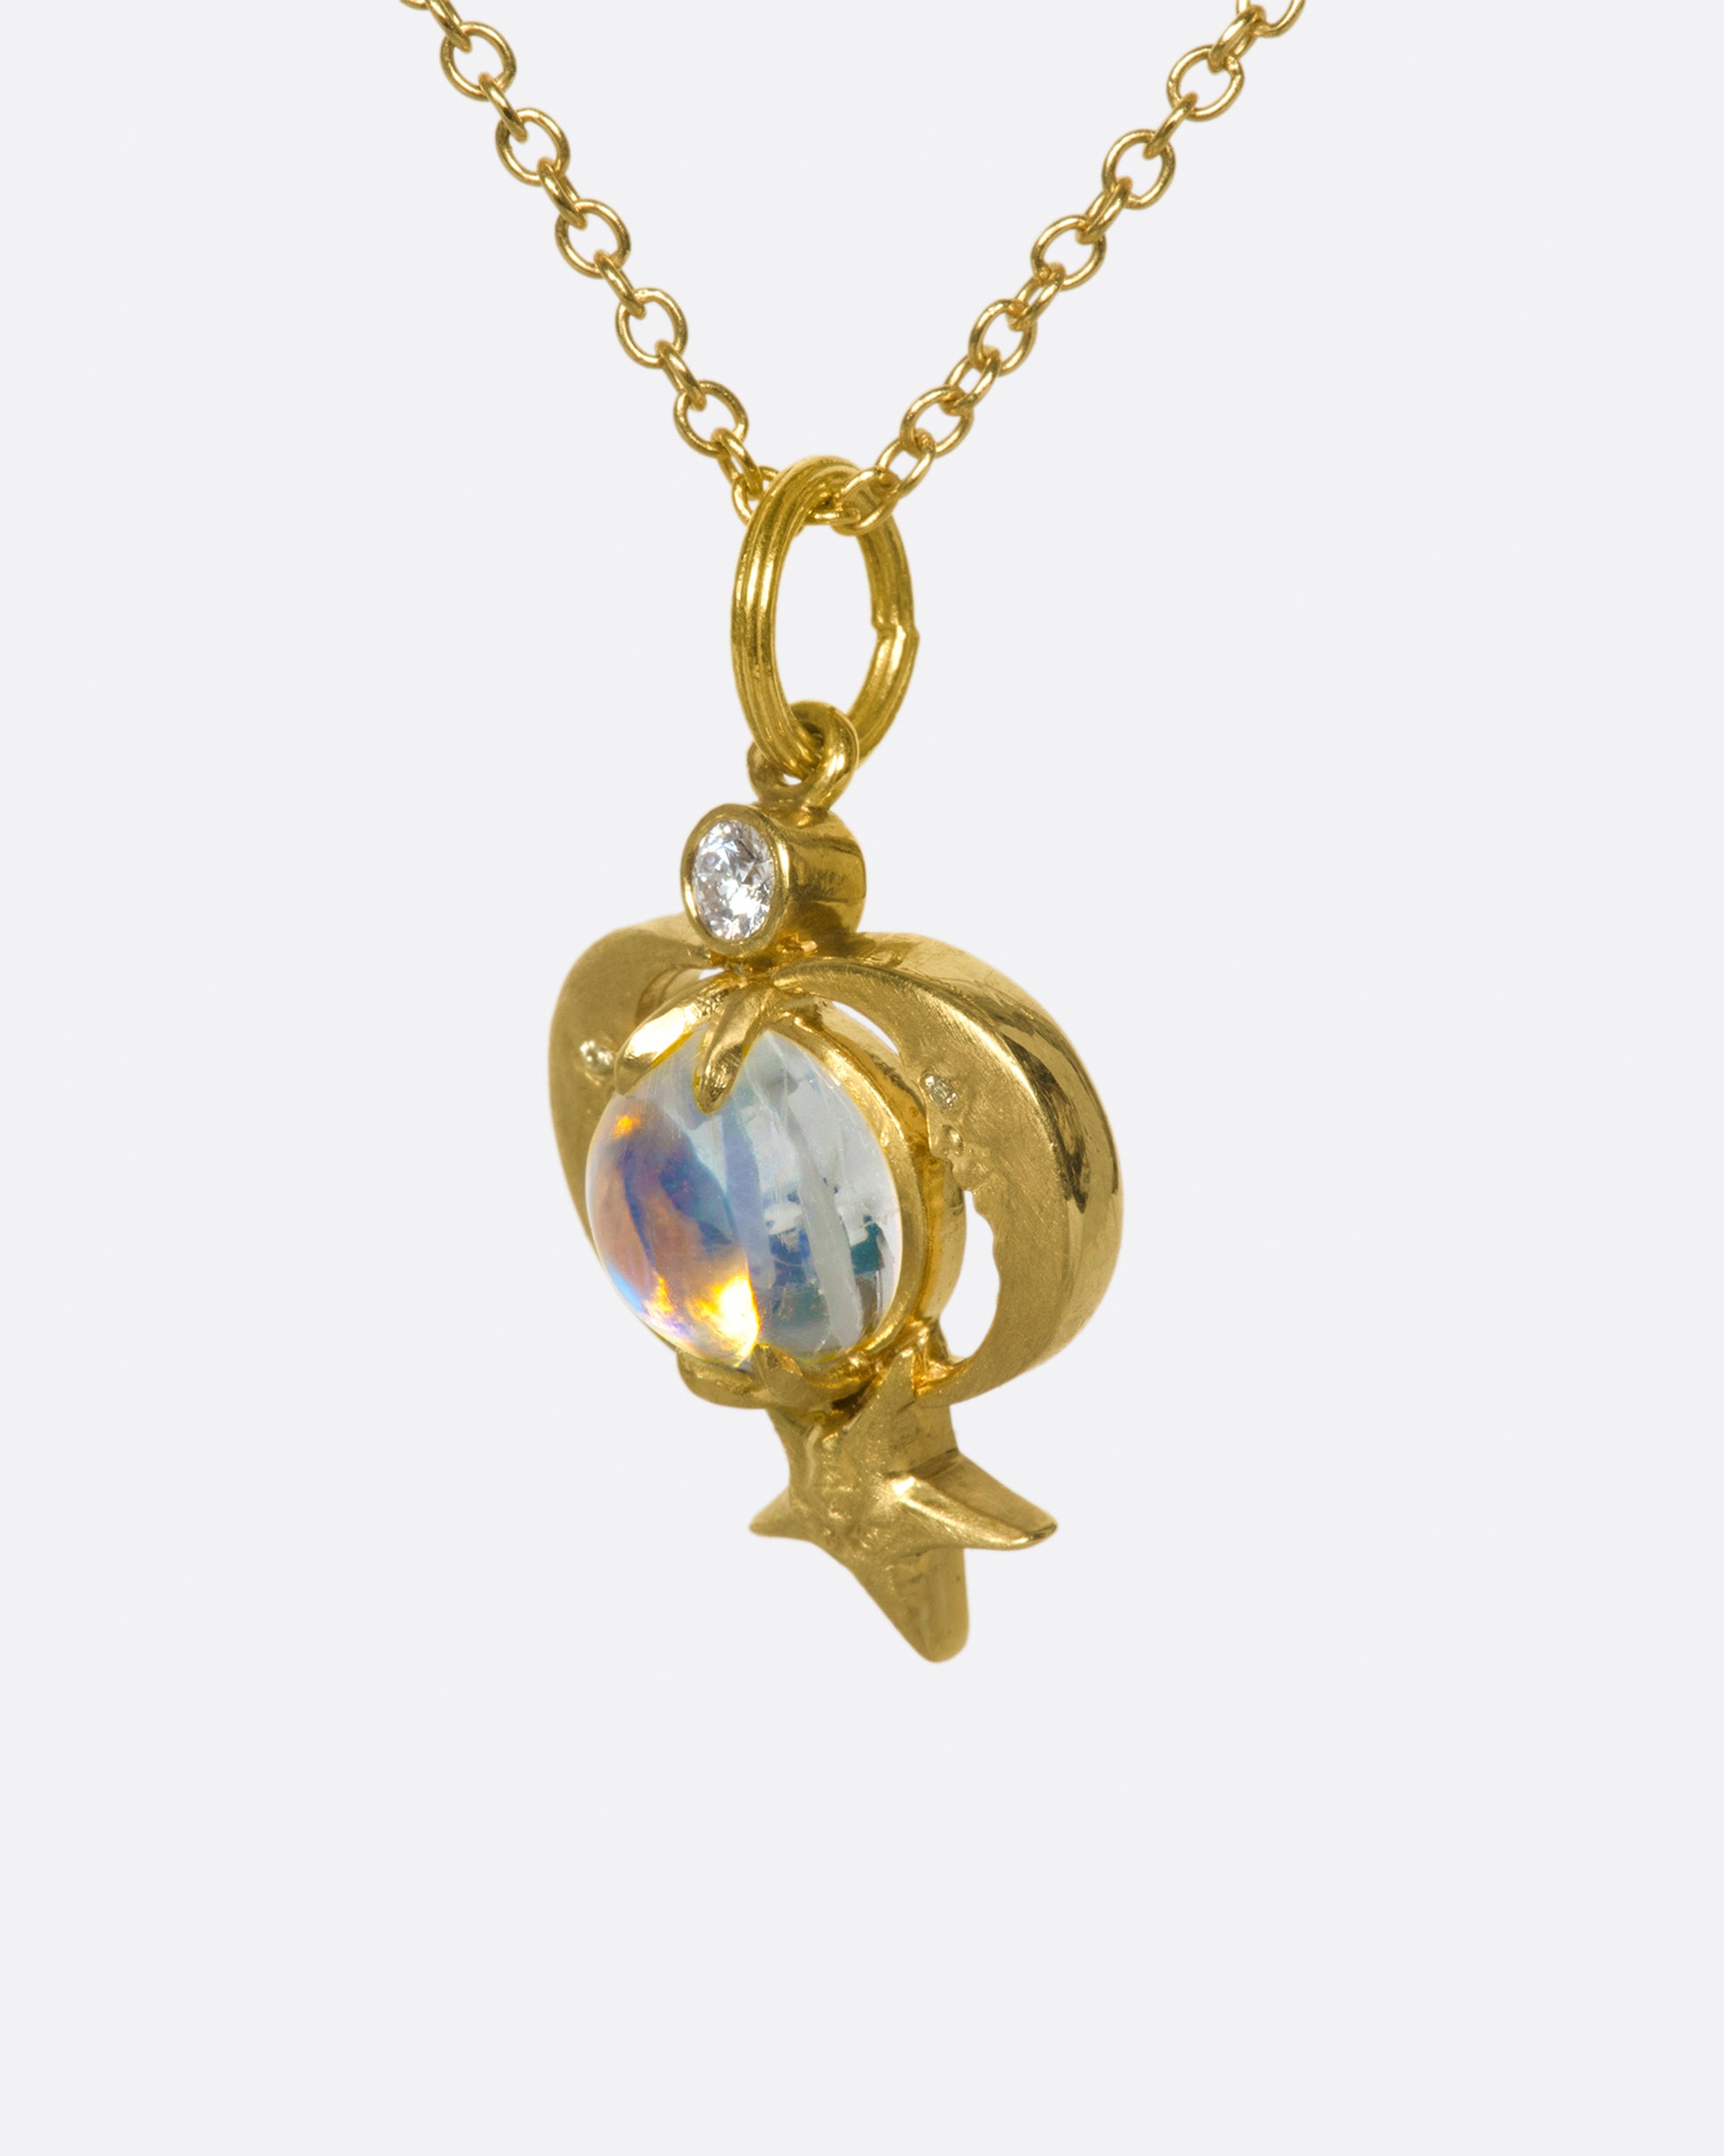 Part of Anthony Lent's beloved Celestial collection, this time with a rainbow moonstone.